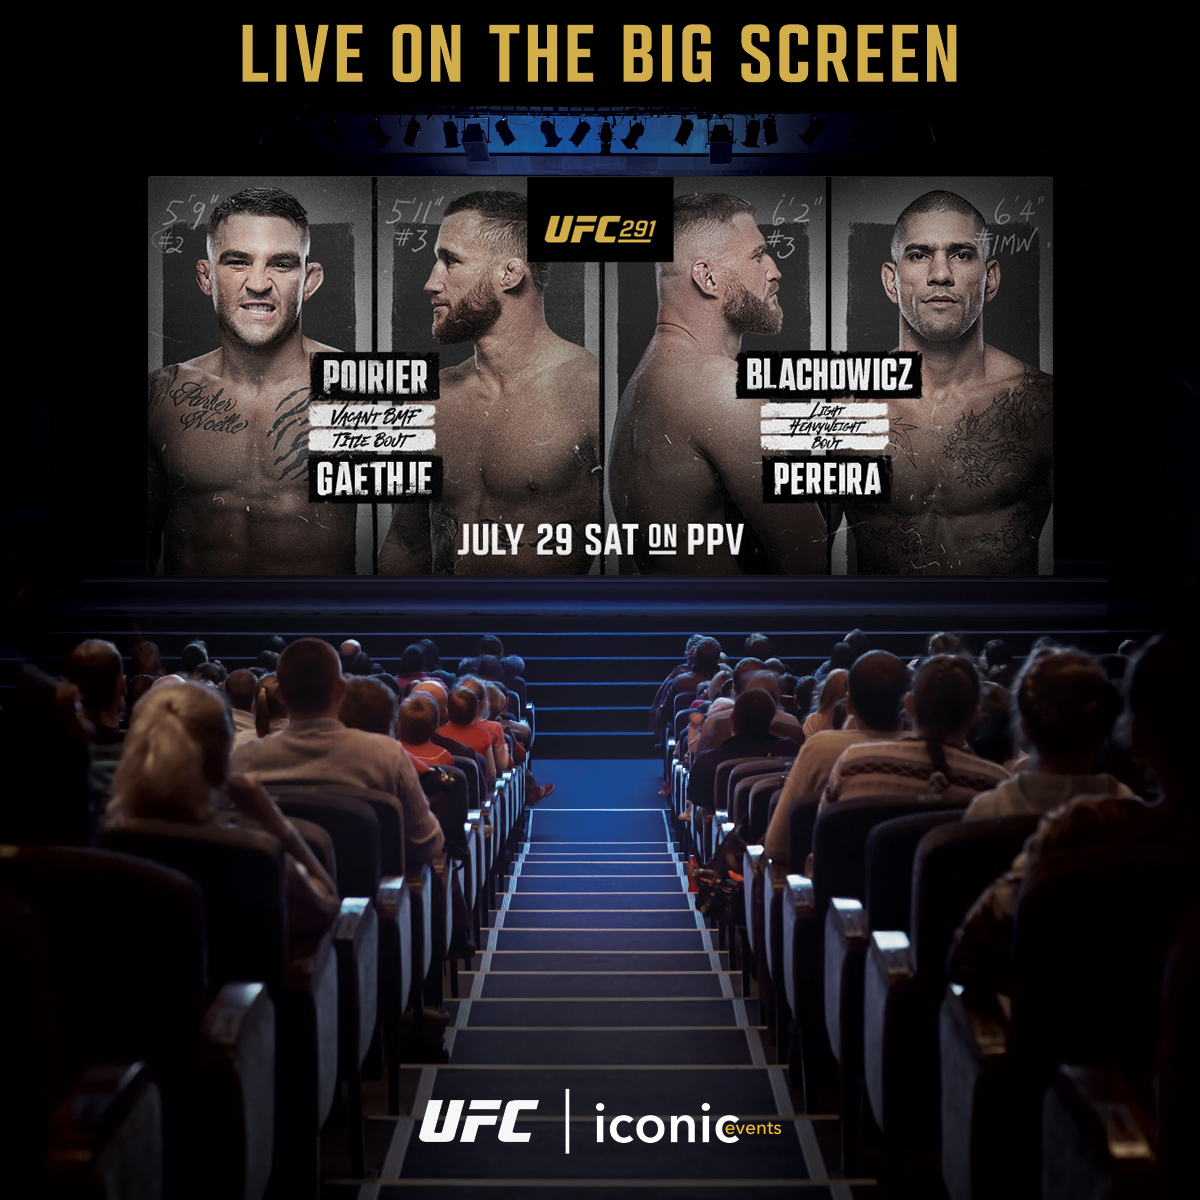 If you thought Oppenheimer was explosive, wait until you experience  #ufc291: Poirier vs. Geathje 2 on the big screen this Sat, July 29th. Book now at the link: bit.ly/UFCliveinTheat…

#UFCliveintheaters #iconiceventsnow @UFC